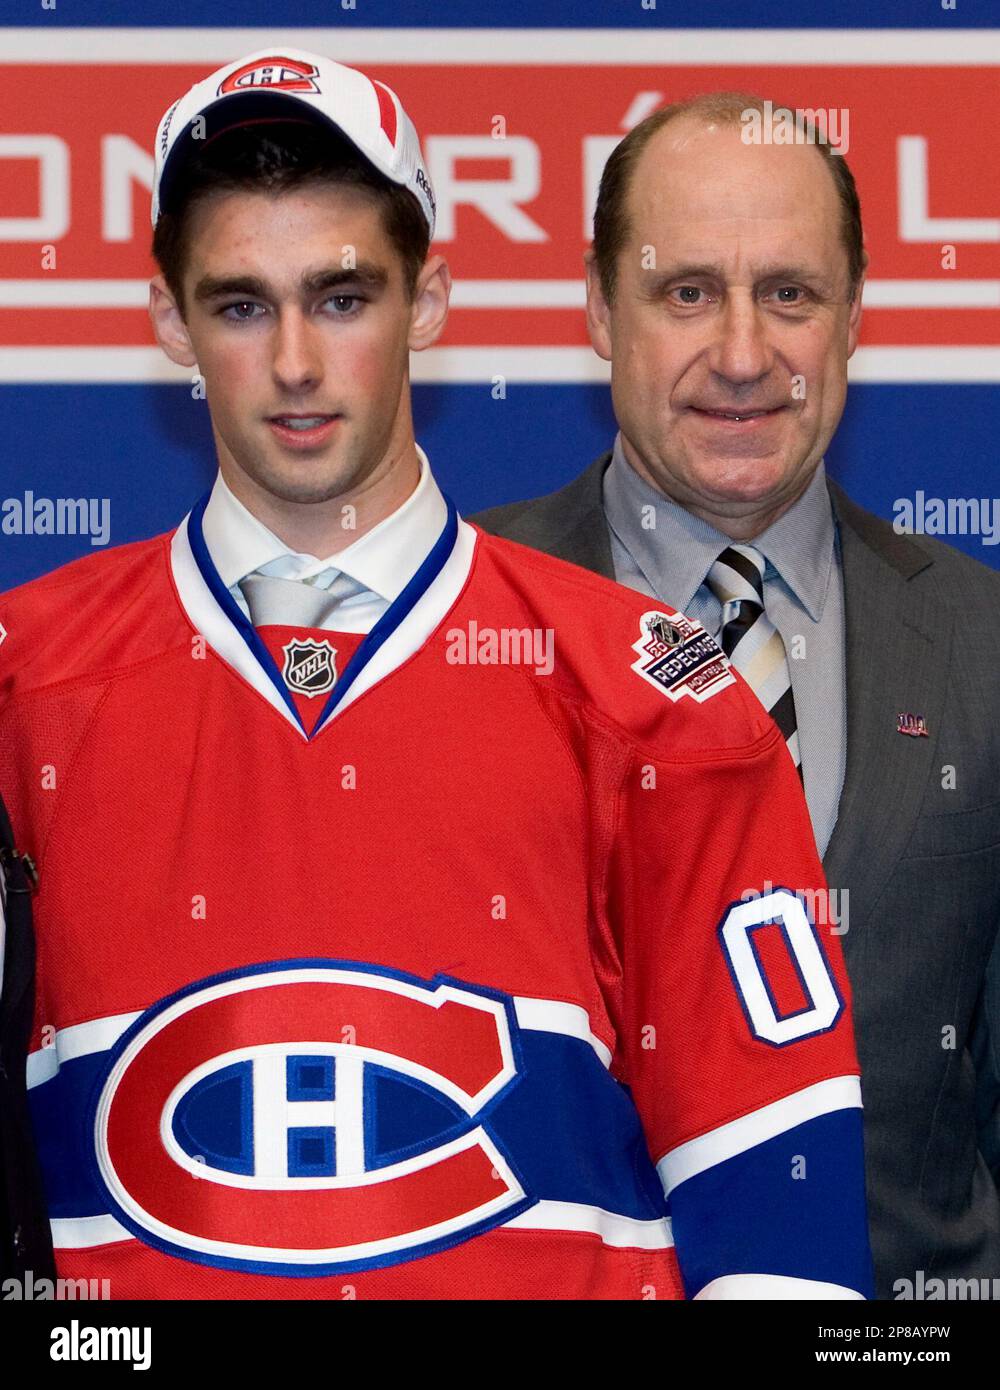 Montreal Canadiens draft pick Louis Leblanc poses for a photo with general manager Bob Gainey at the 2009 NHL hockey entry draft Friday, June 26, 2009, in Montreal